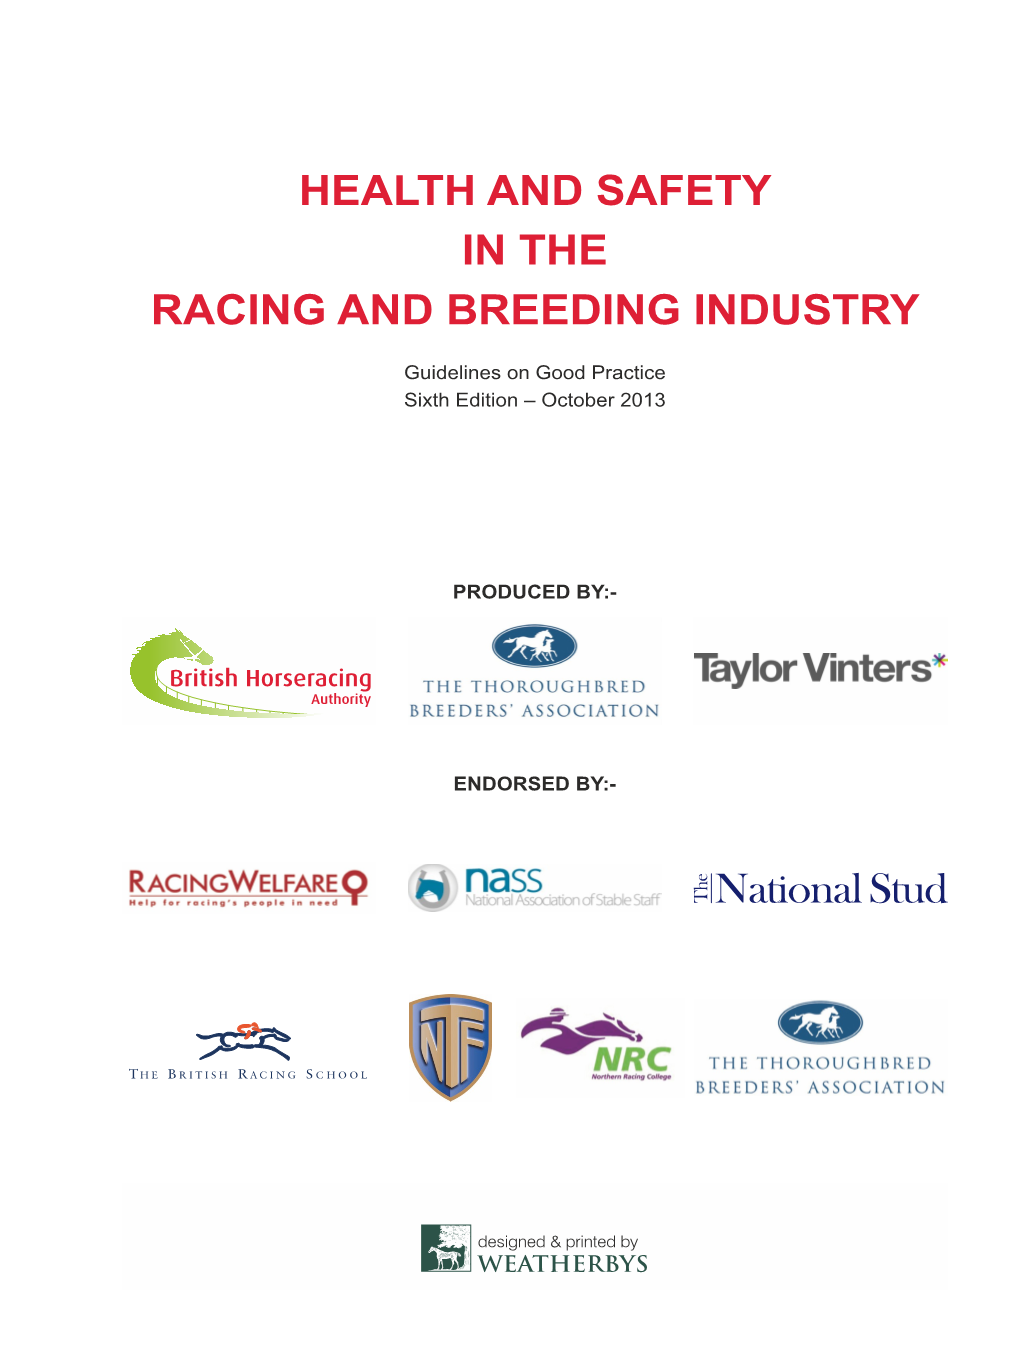 Health and Safety in the Racing and Breeding Industry